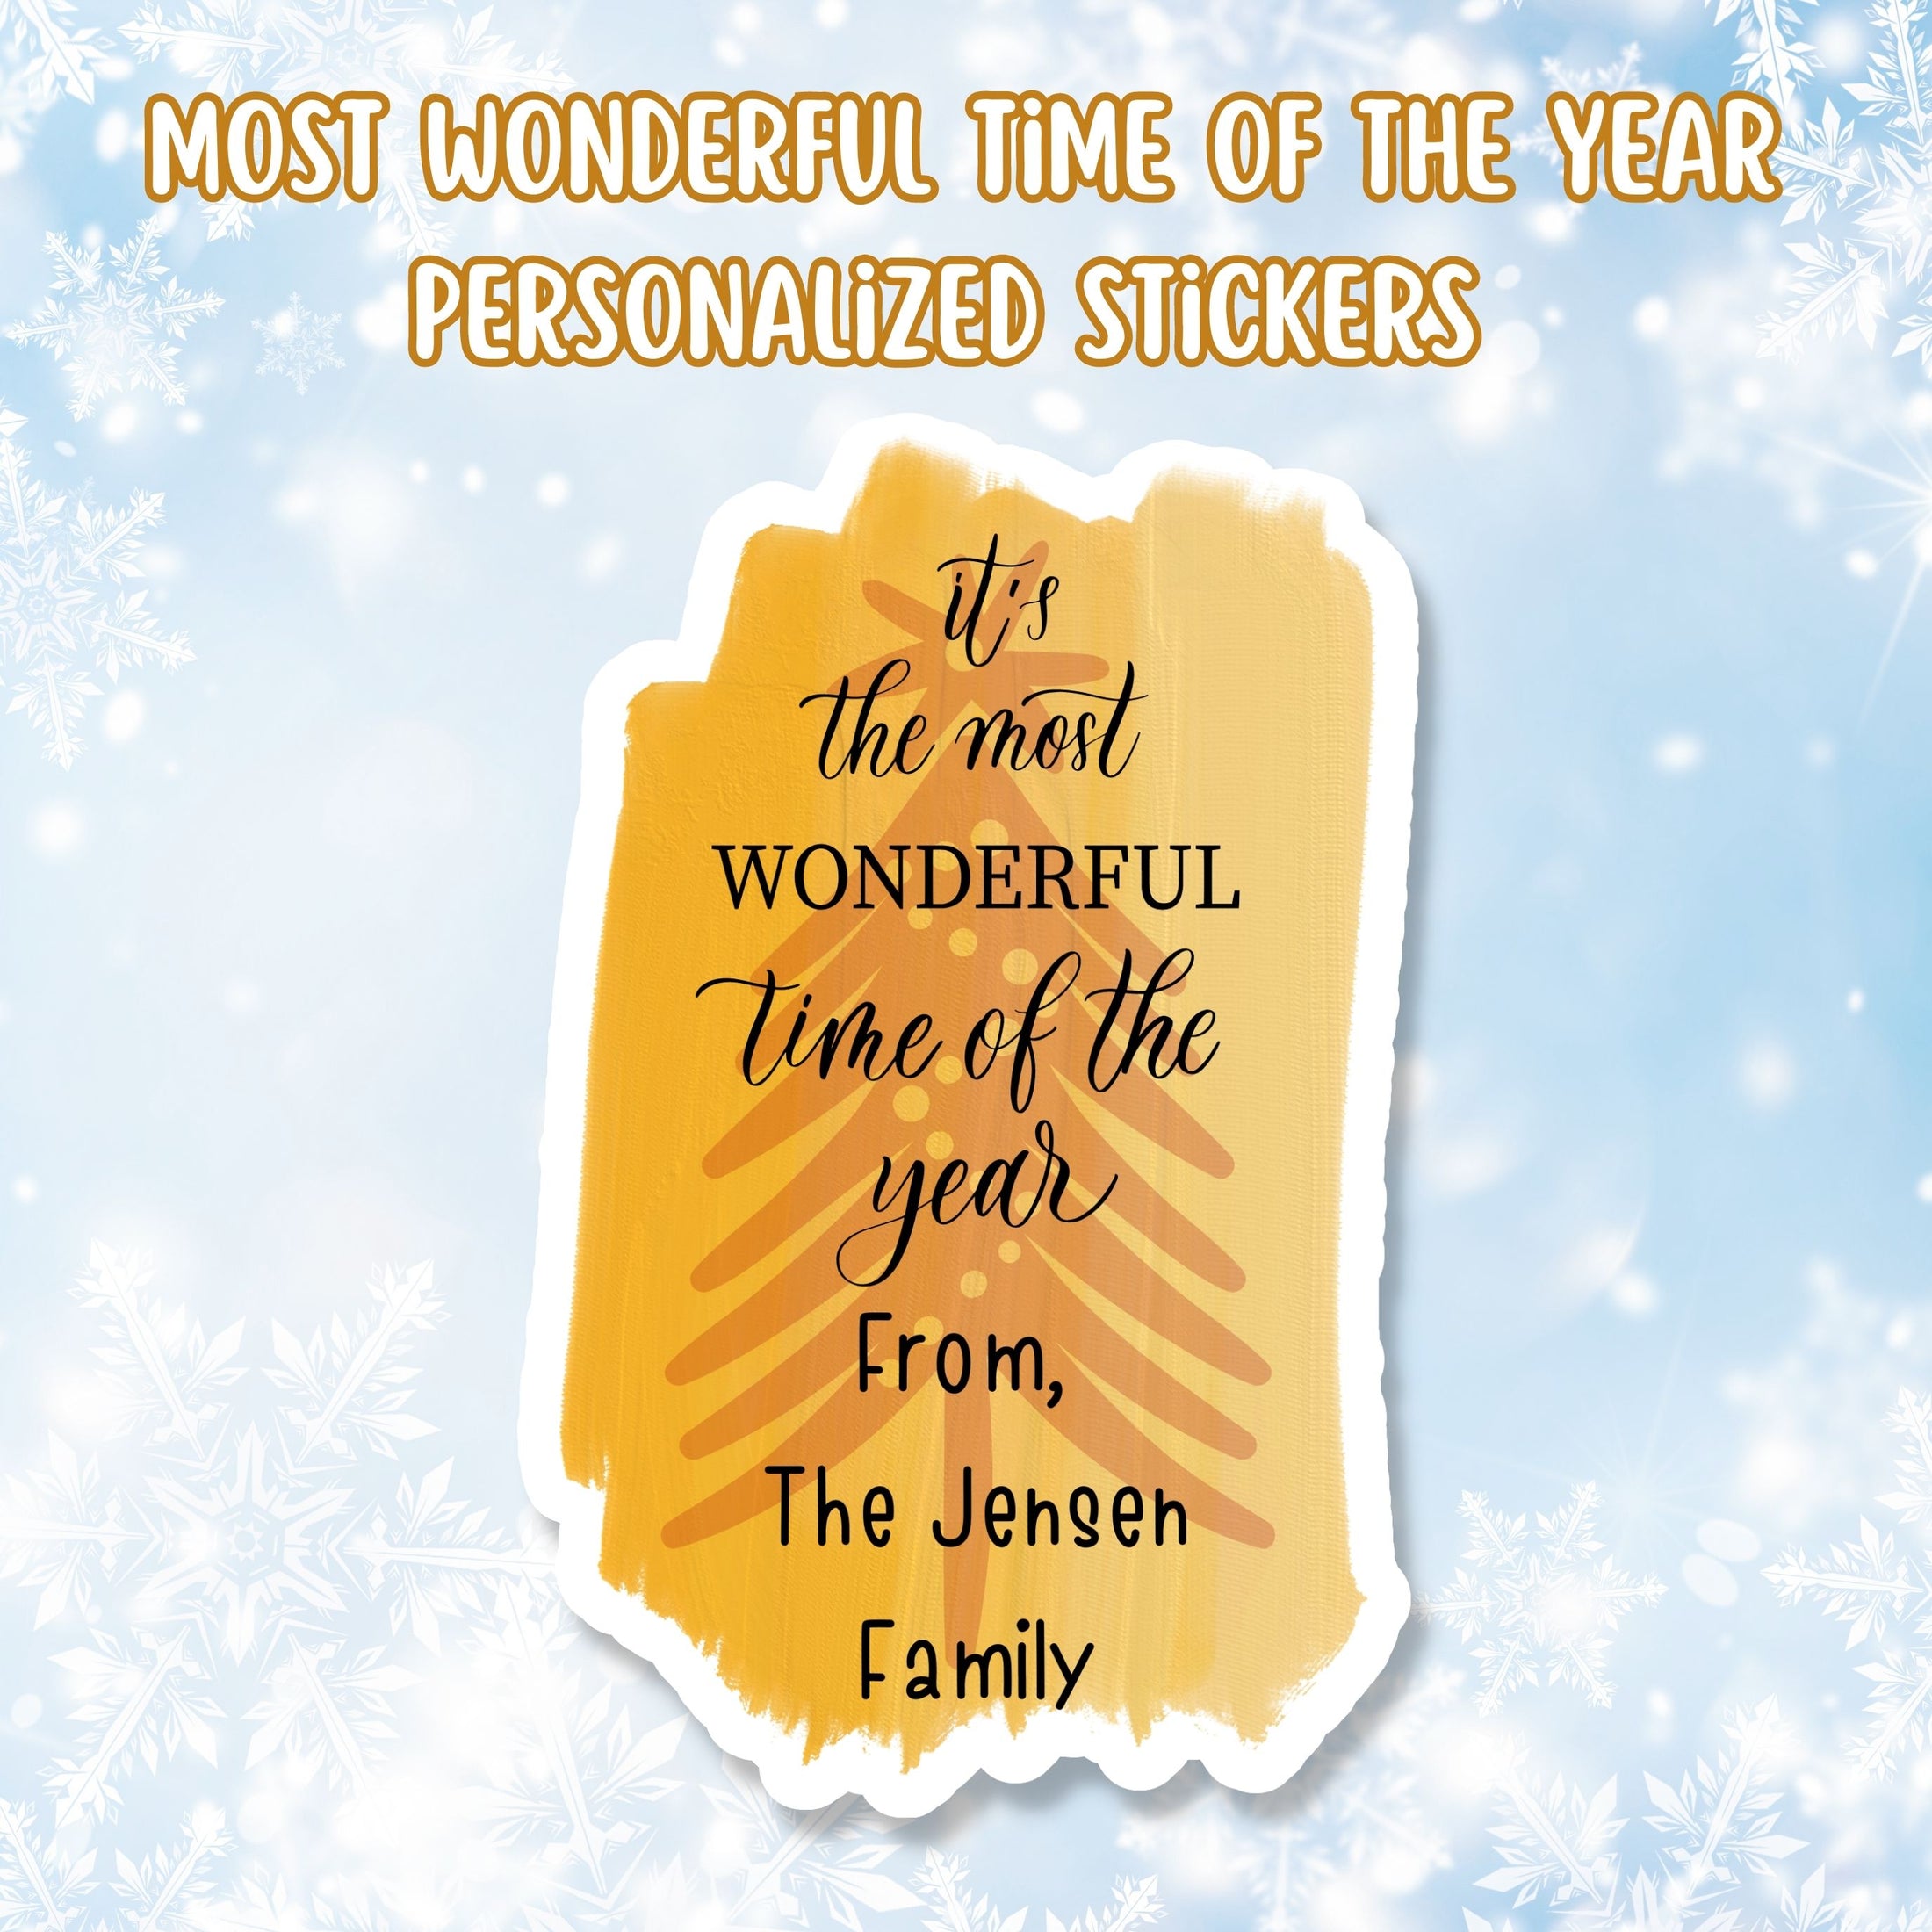 This cover page shows the personalized holiday sticker on a snowflake background.